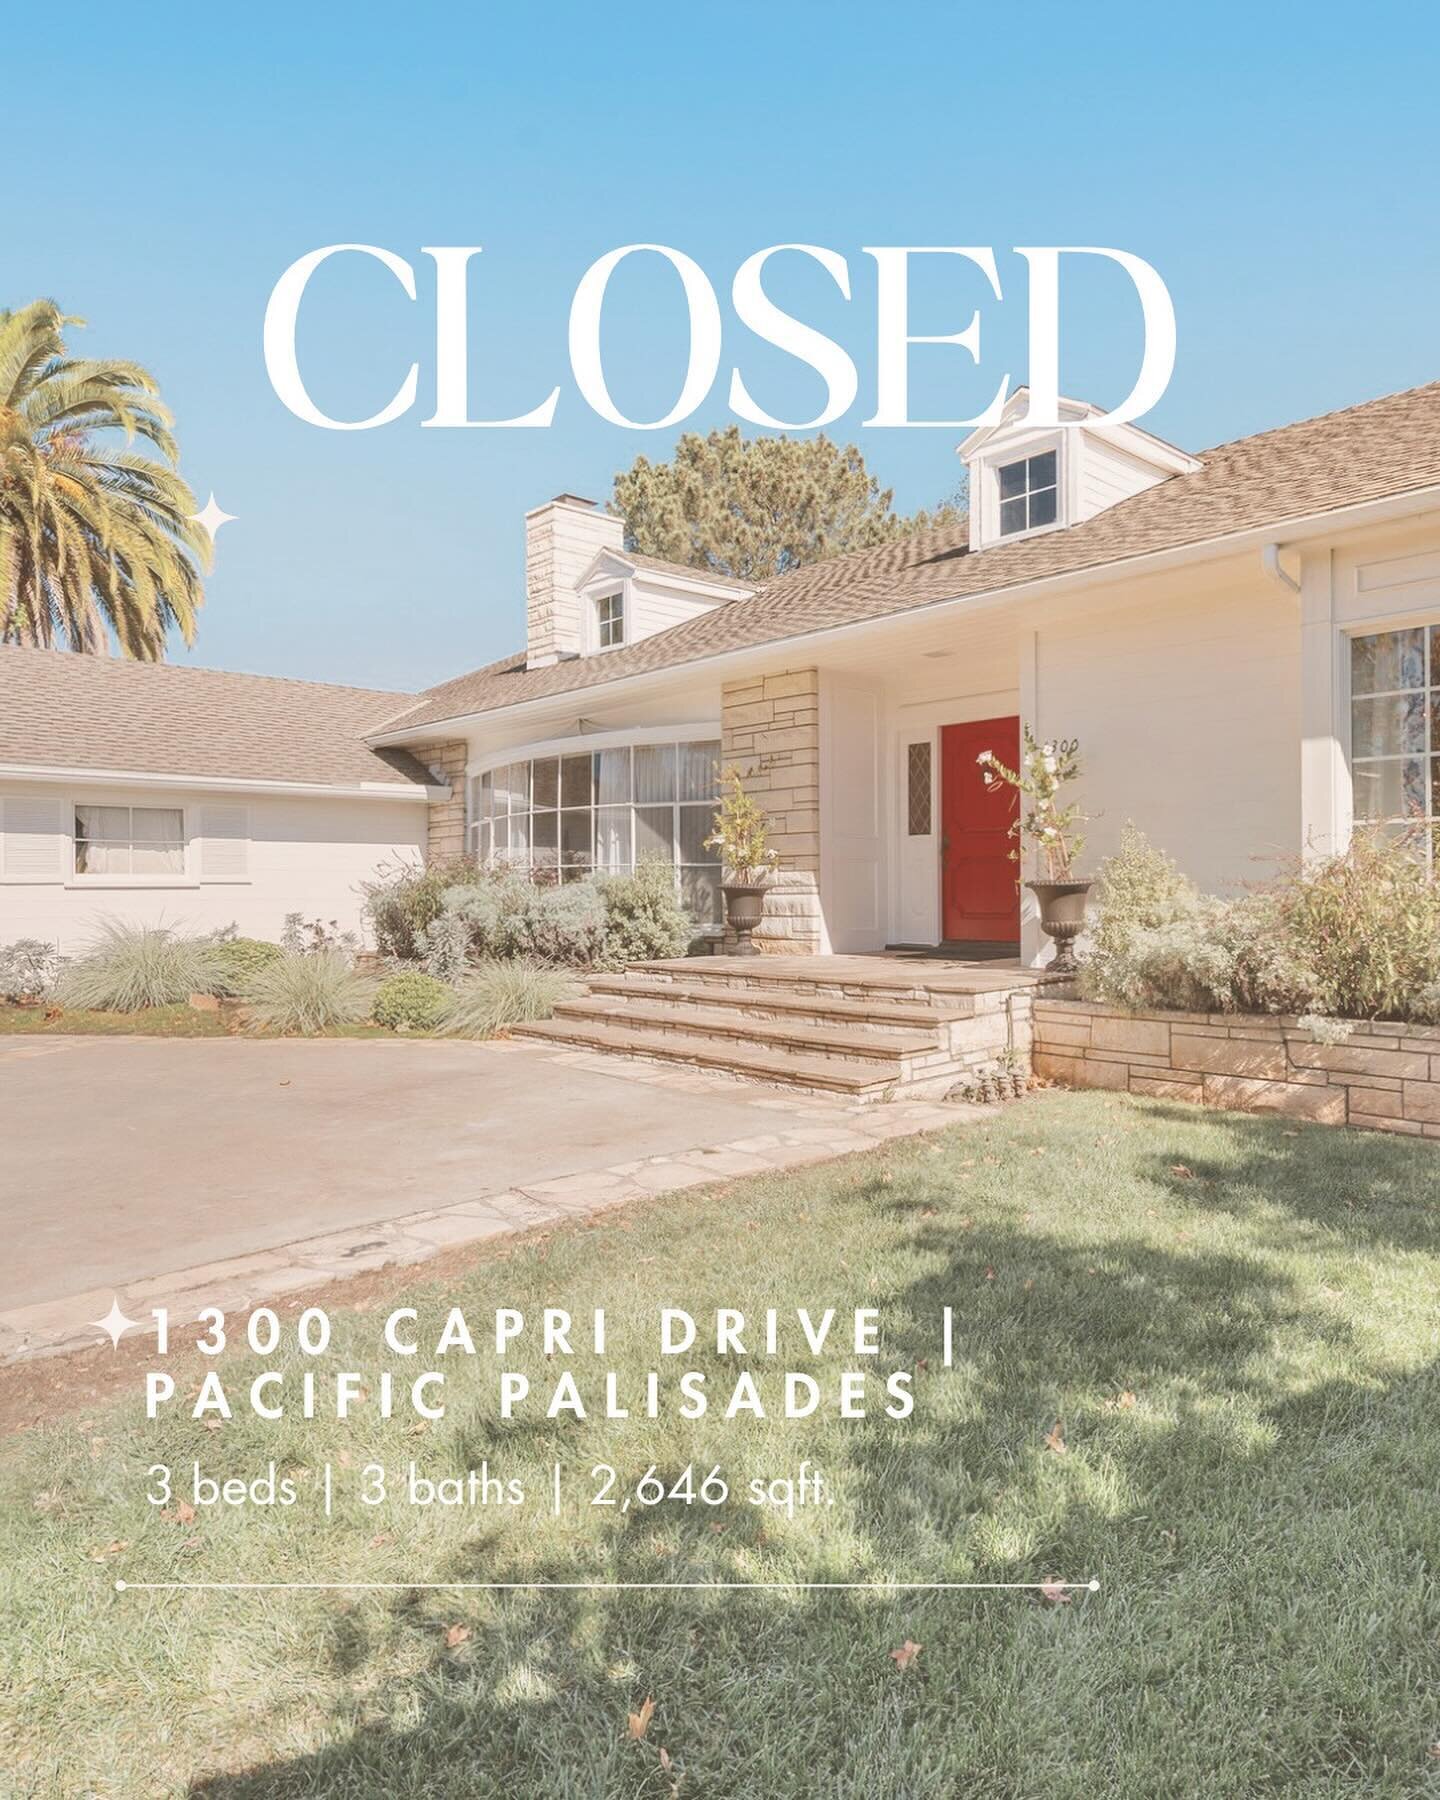 🏡 Just SOLD! This lovingly cared for Traditional home in the prestigious Riviera Palisades neighborhood has found its new owner. Congratulations to the lucky buyer who recognized the incredible value and potential of this property.

🌅 Perched above